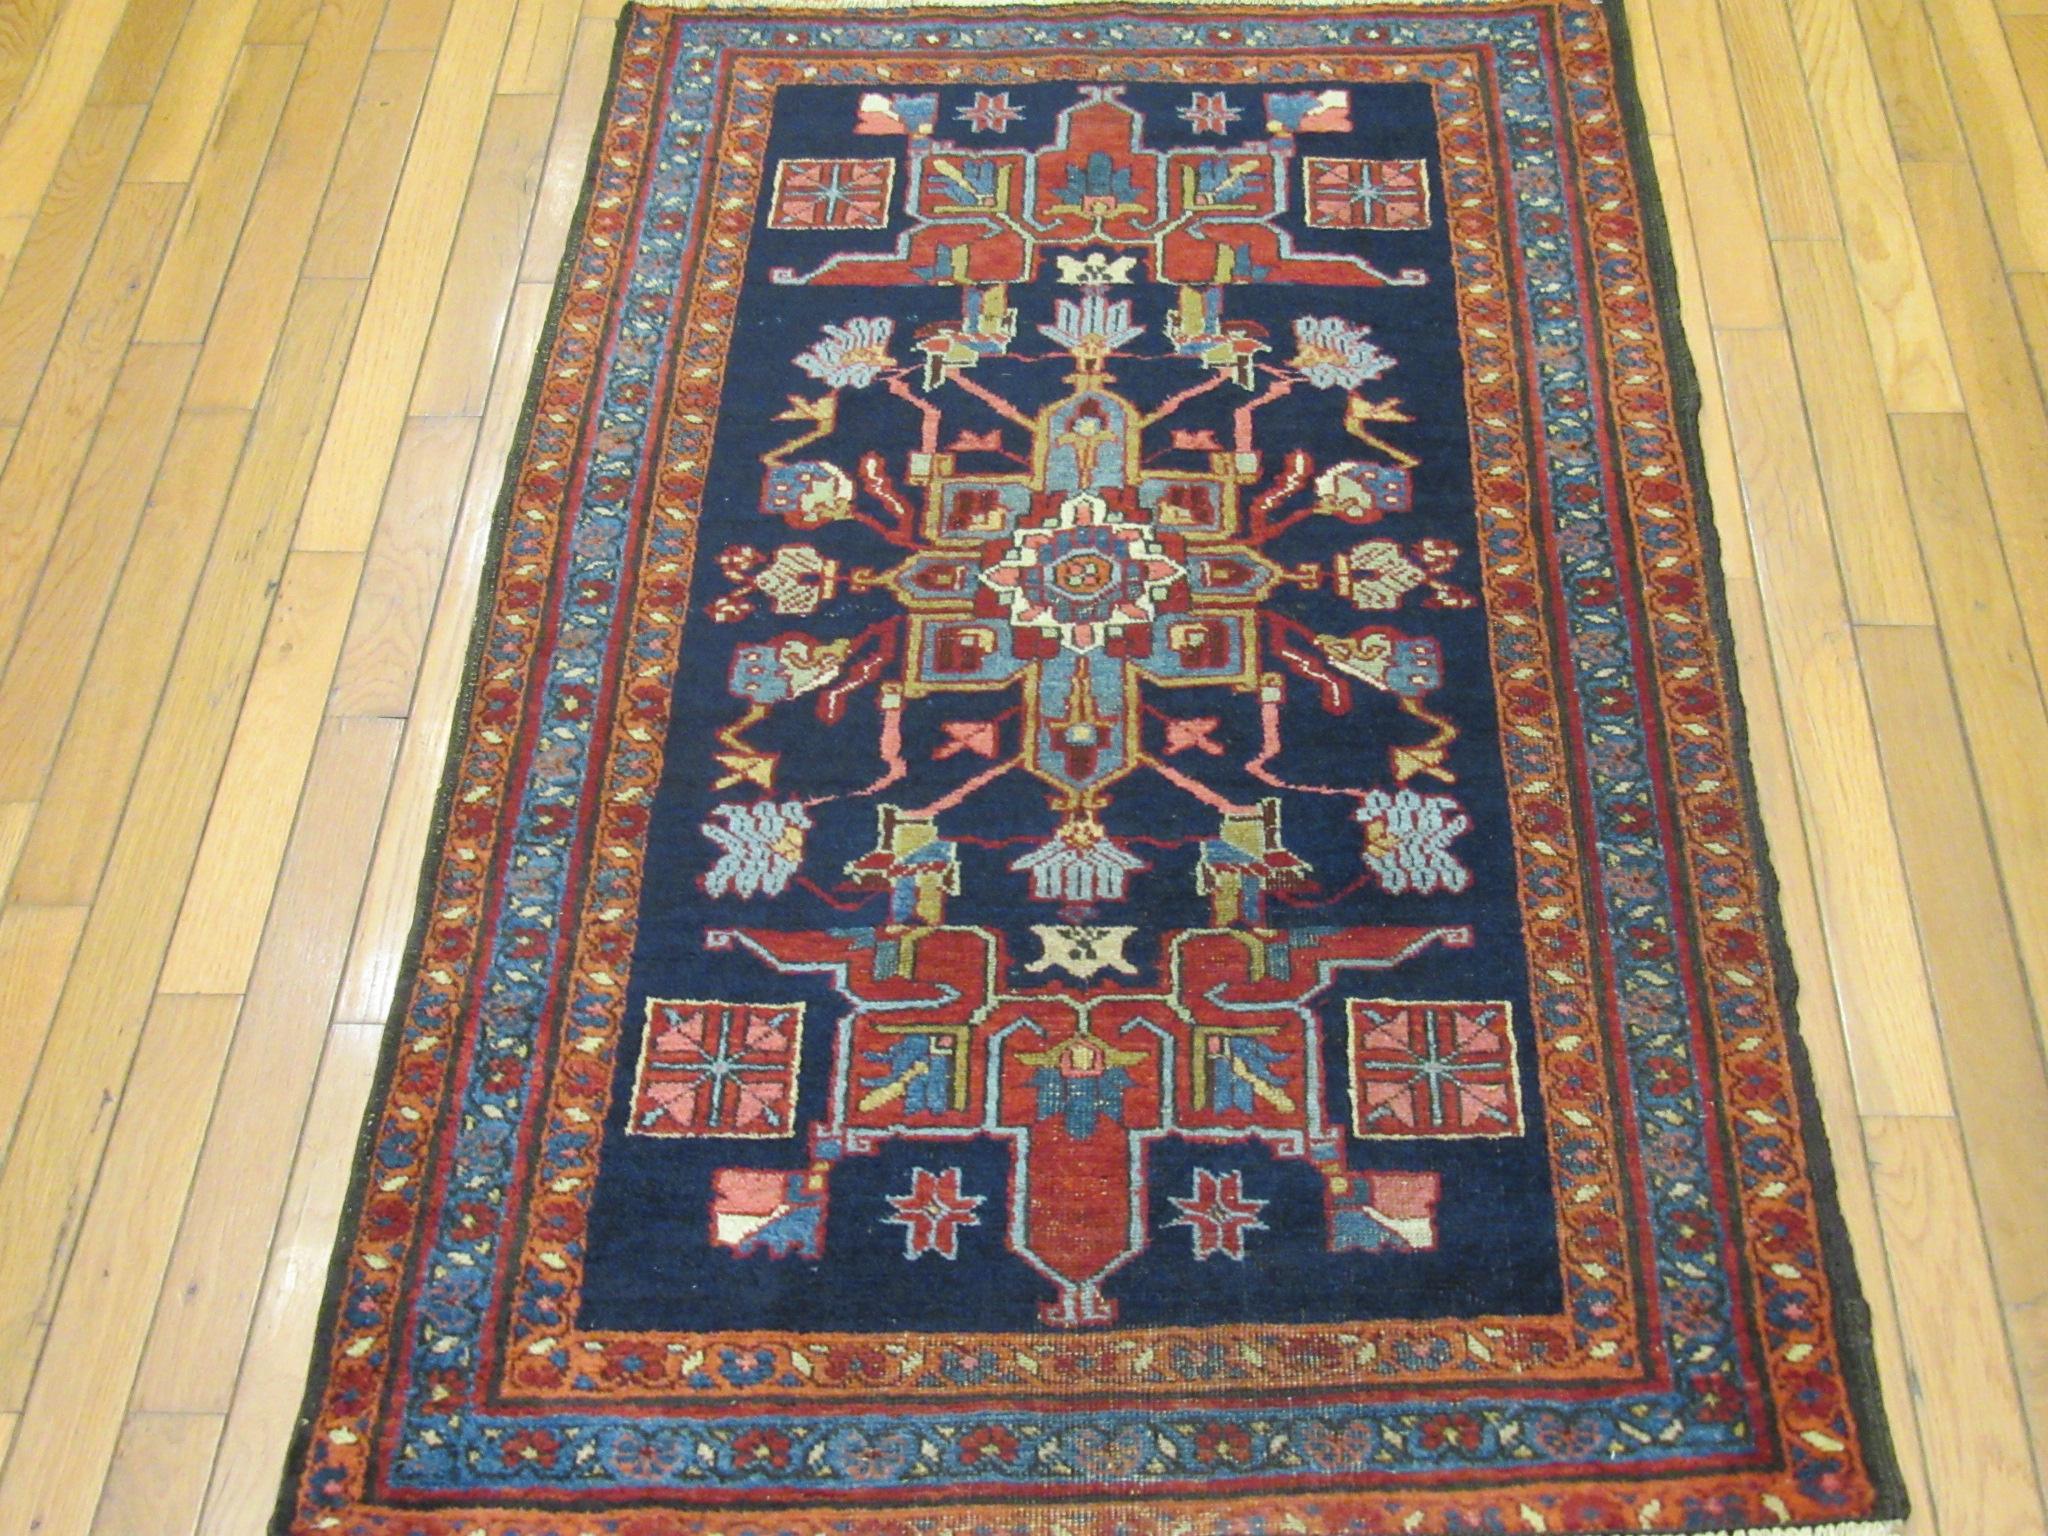 This is a small hand-knotted antique Persian Heriz rug. It is made with wool pile and cotton foundation and natural dyes in a geometric design. It is a perfect rug for any spot in your house or office. It measures 2' 10'' x 4' 7'' and in great